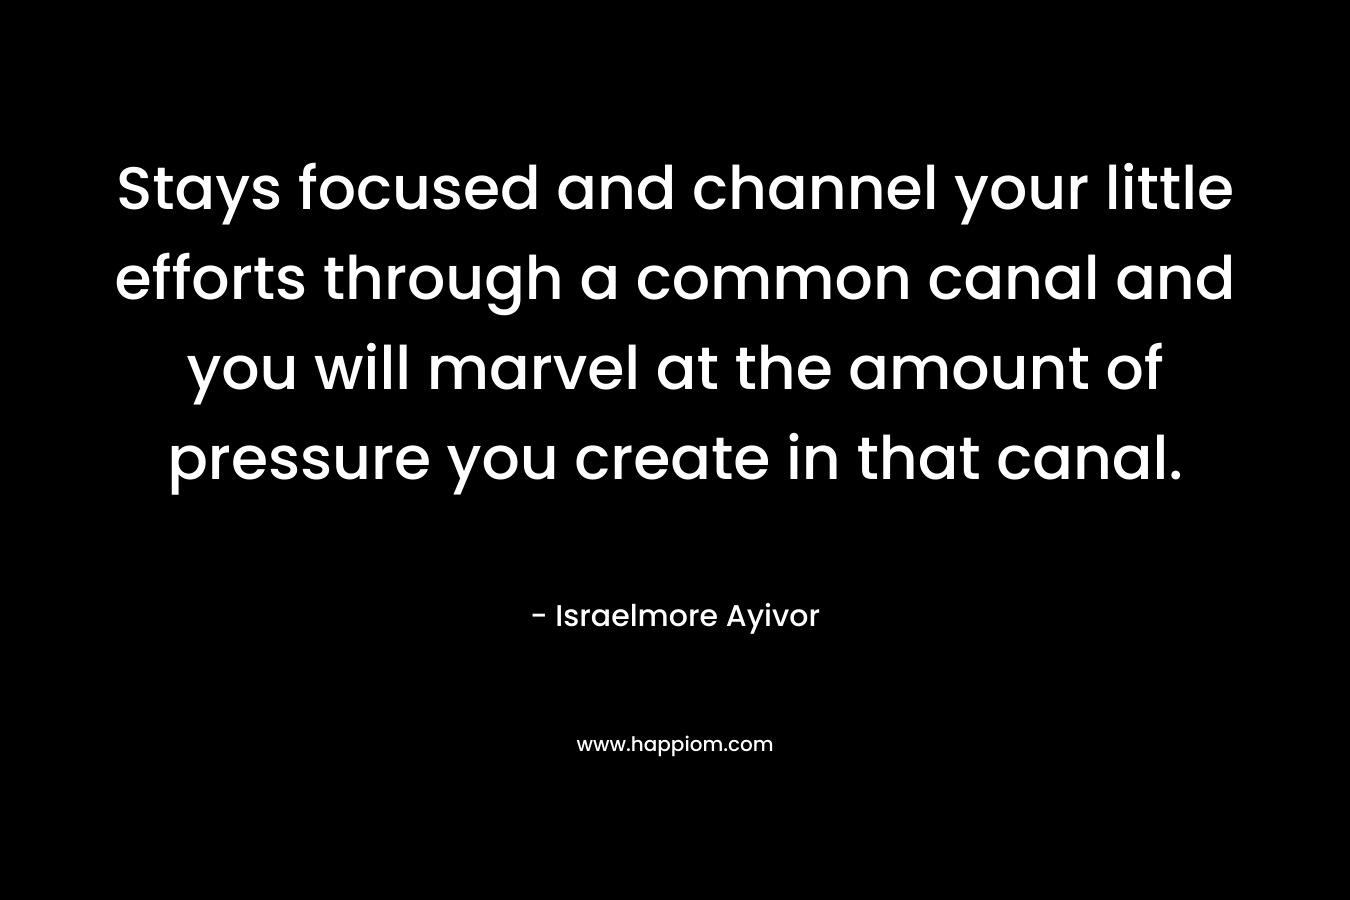 Stays focused and channel your little efforts through a common canal and you will marvel at the amount of pressure you create in that canal. – Israelmore Ayivor